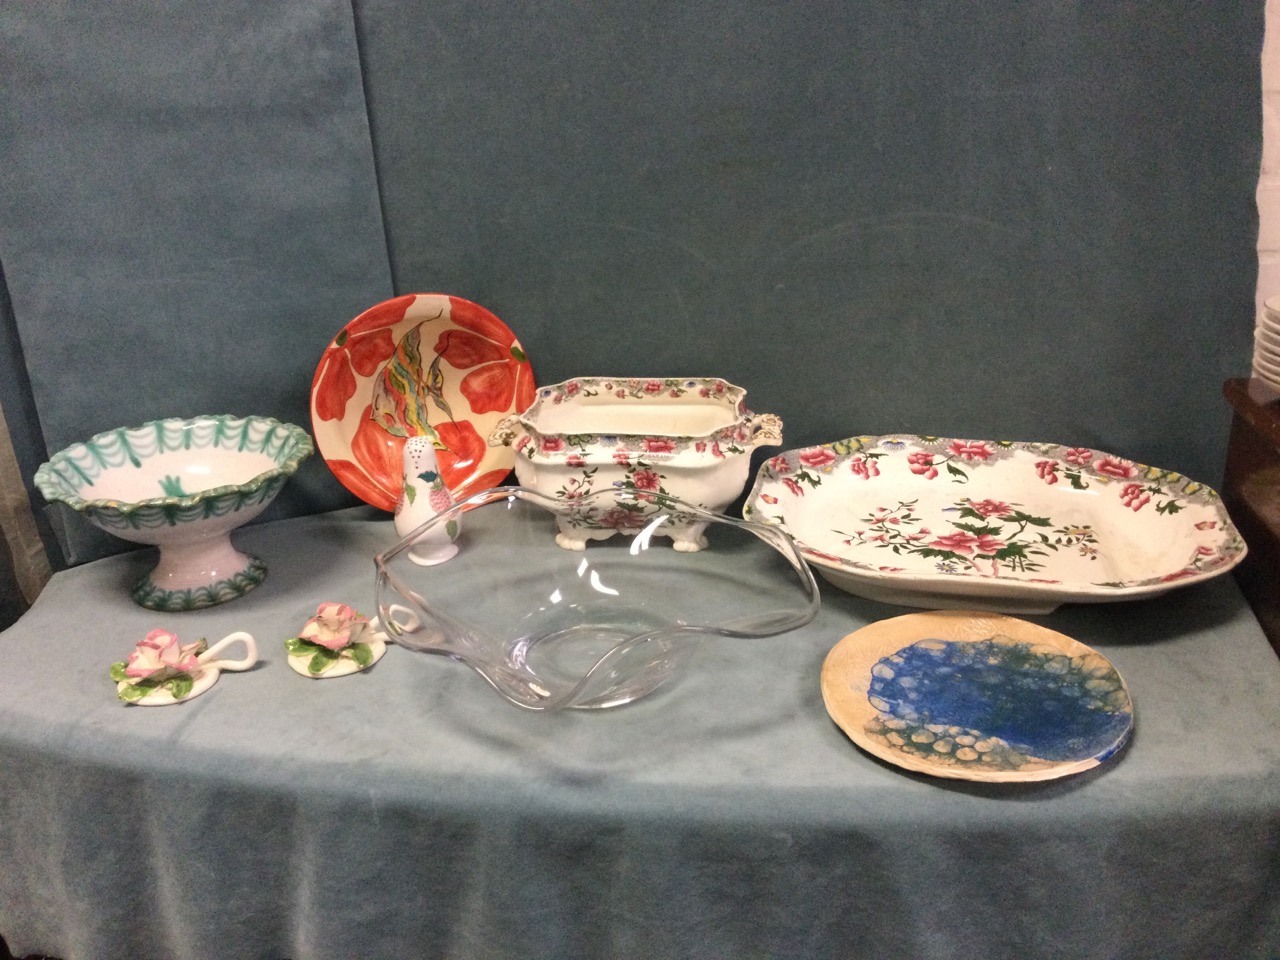 Miscellaneous ceramics & glass - a French crystal Bayel waved bowl, studio pottery, a sugar